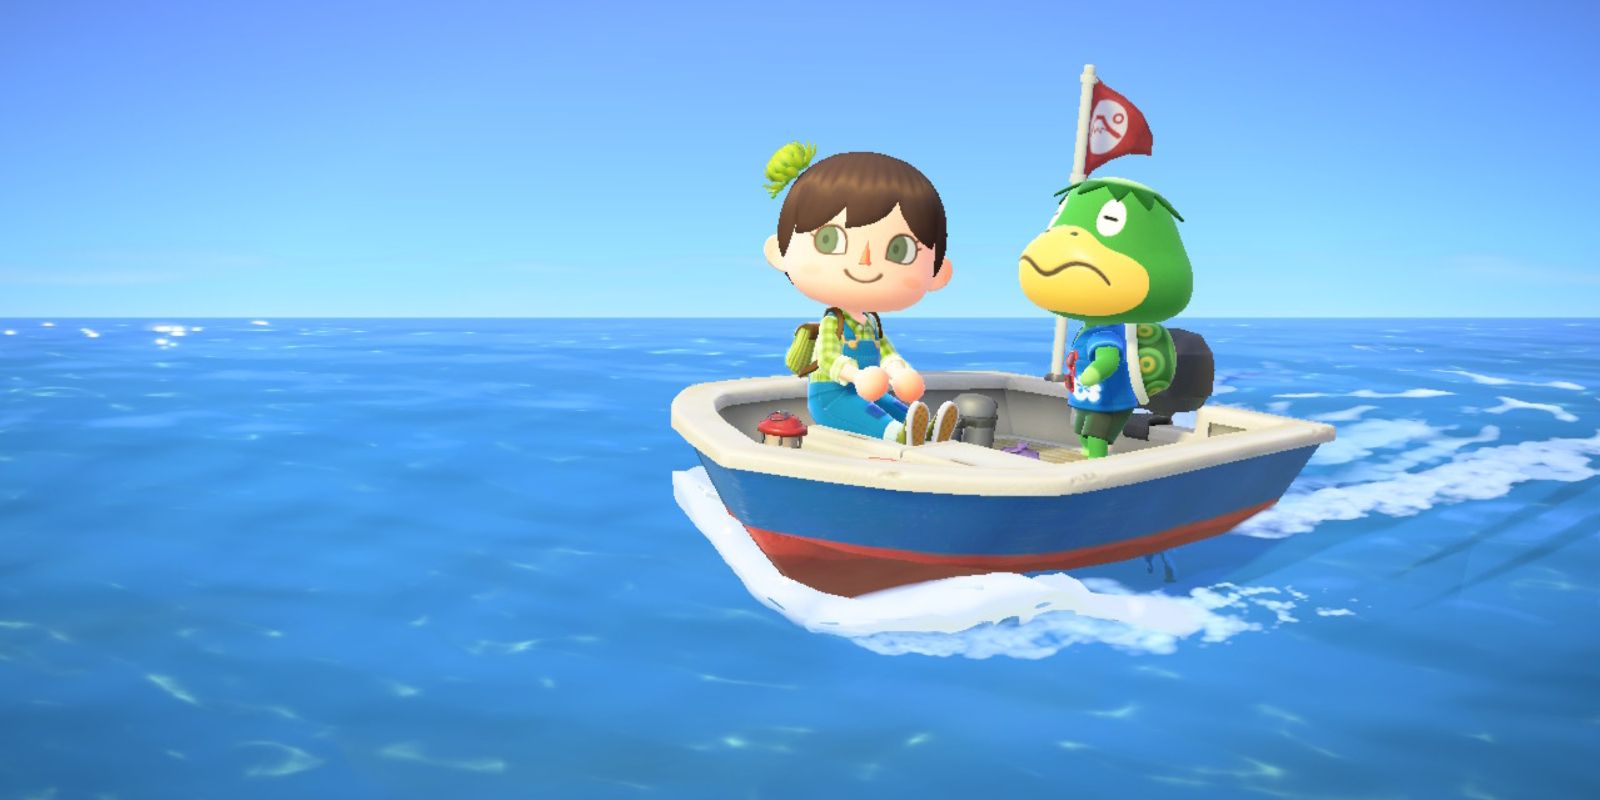 A player sits in a motorized boat with Kapp'n in Animal Crossing New Horizons